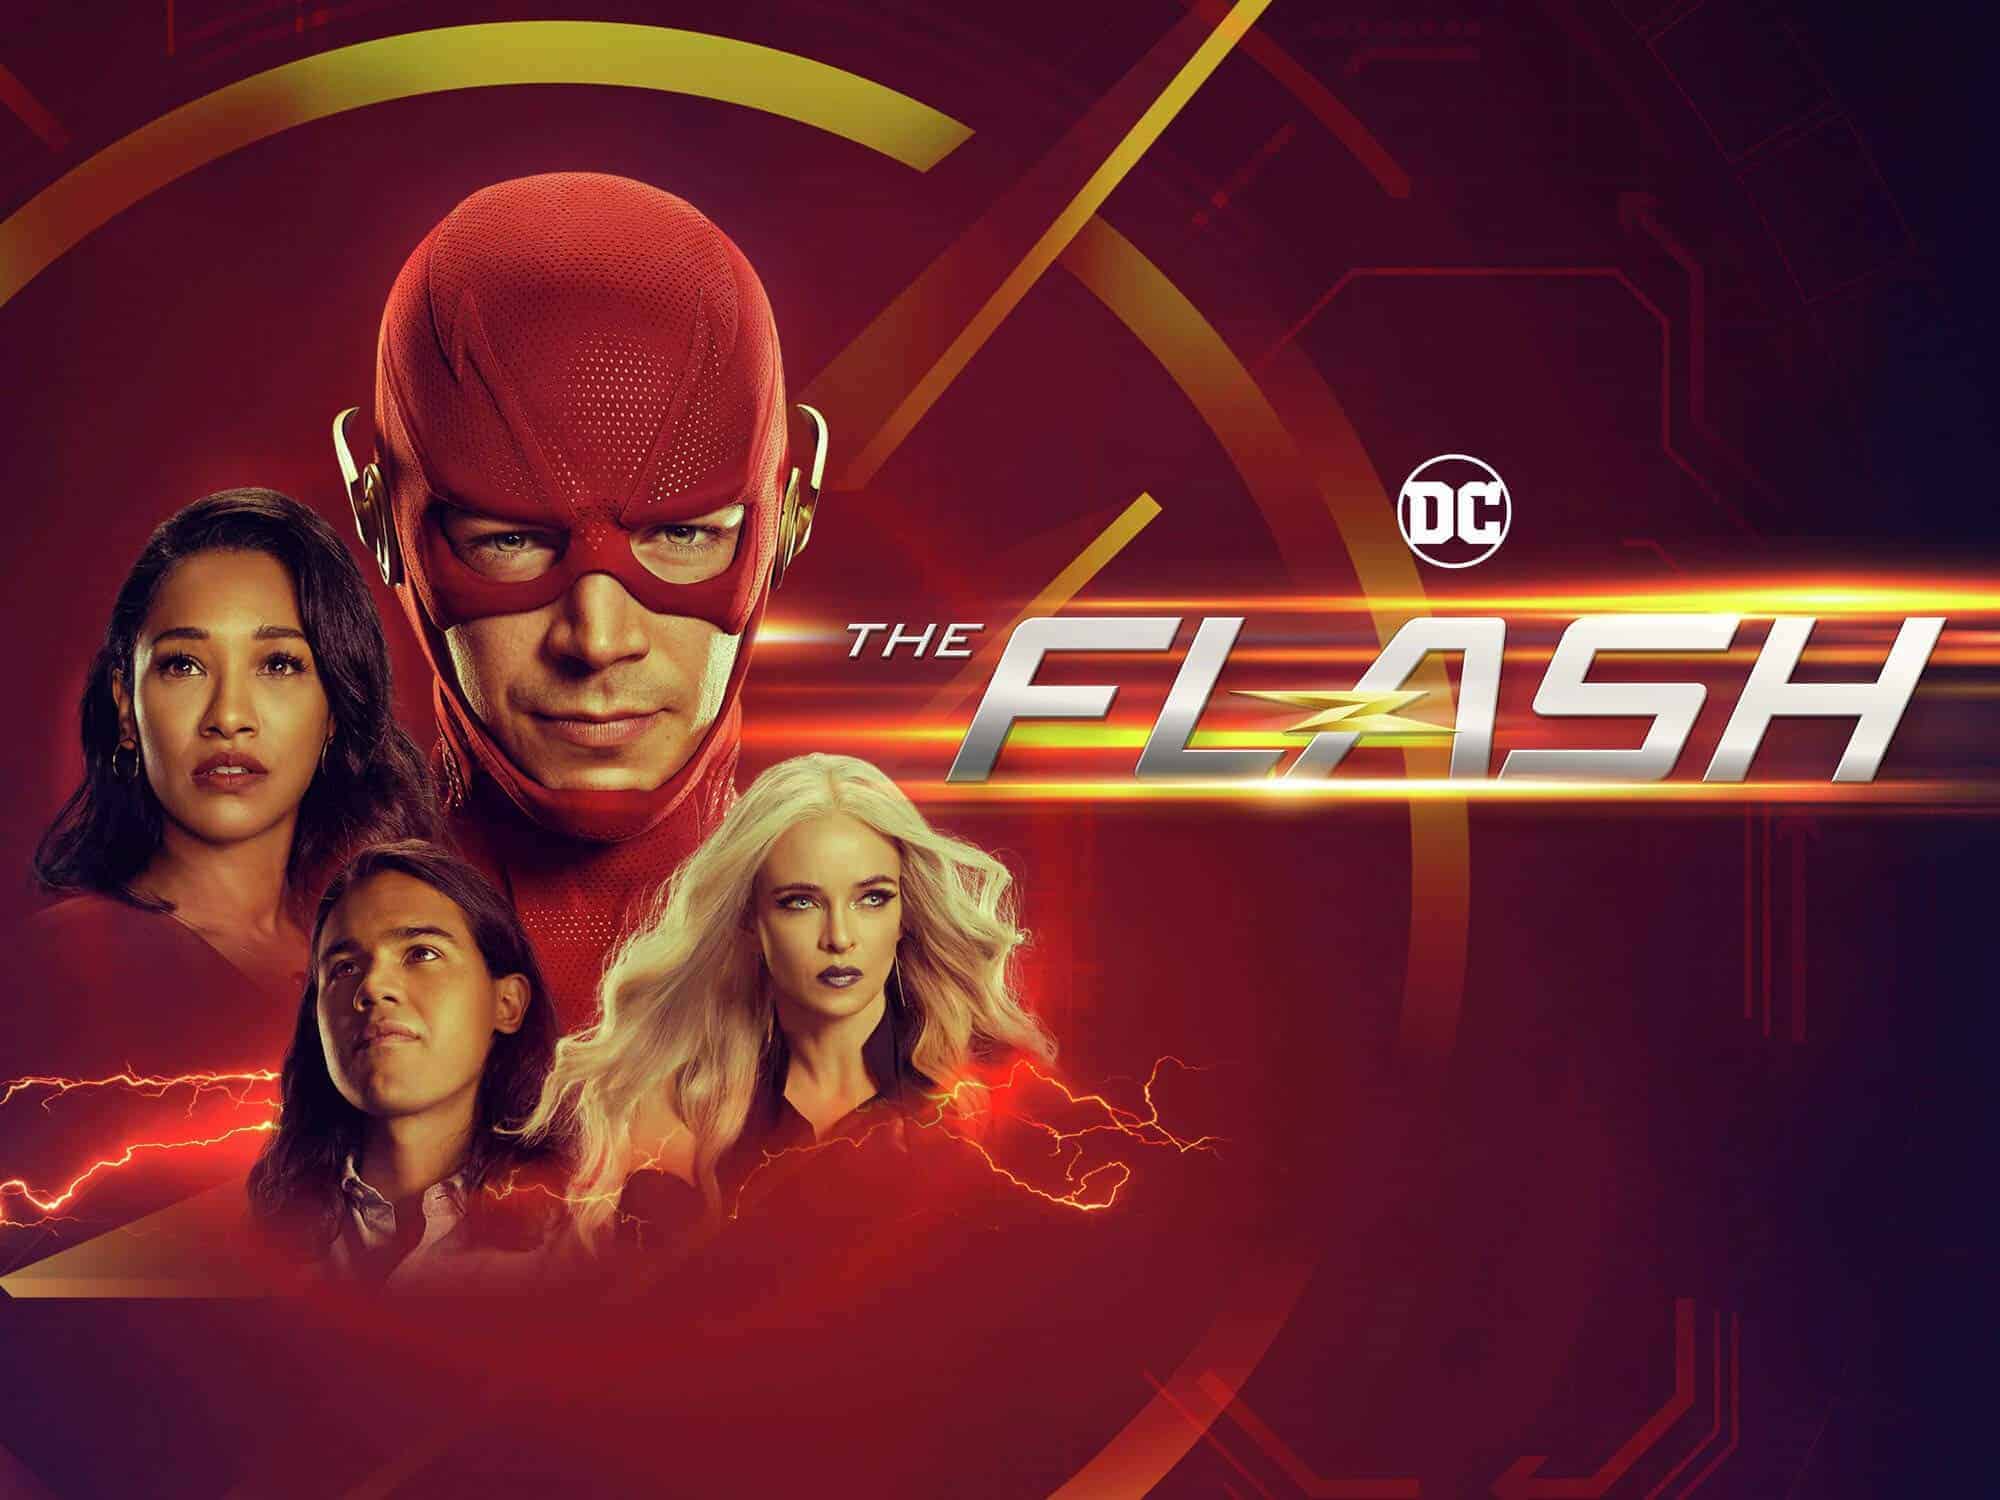 How “The Flash” TV Show Fits Into DC’s Universe